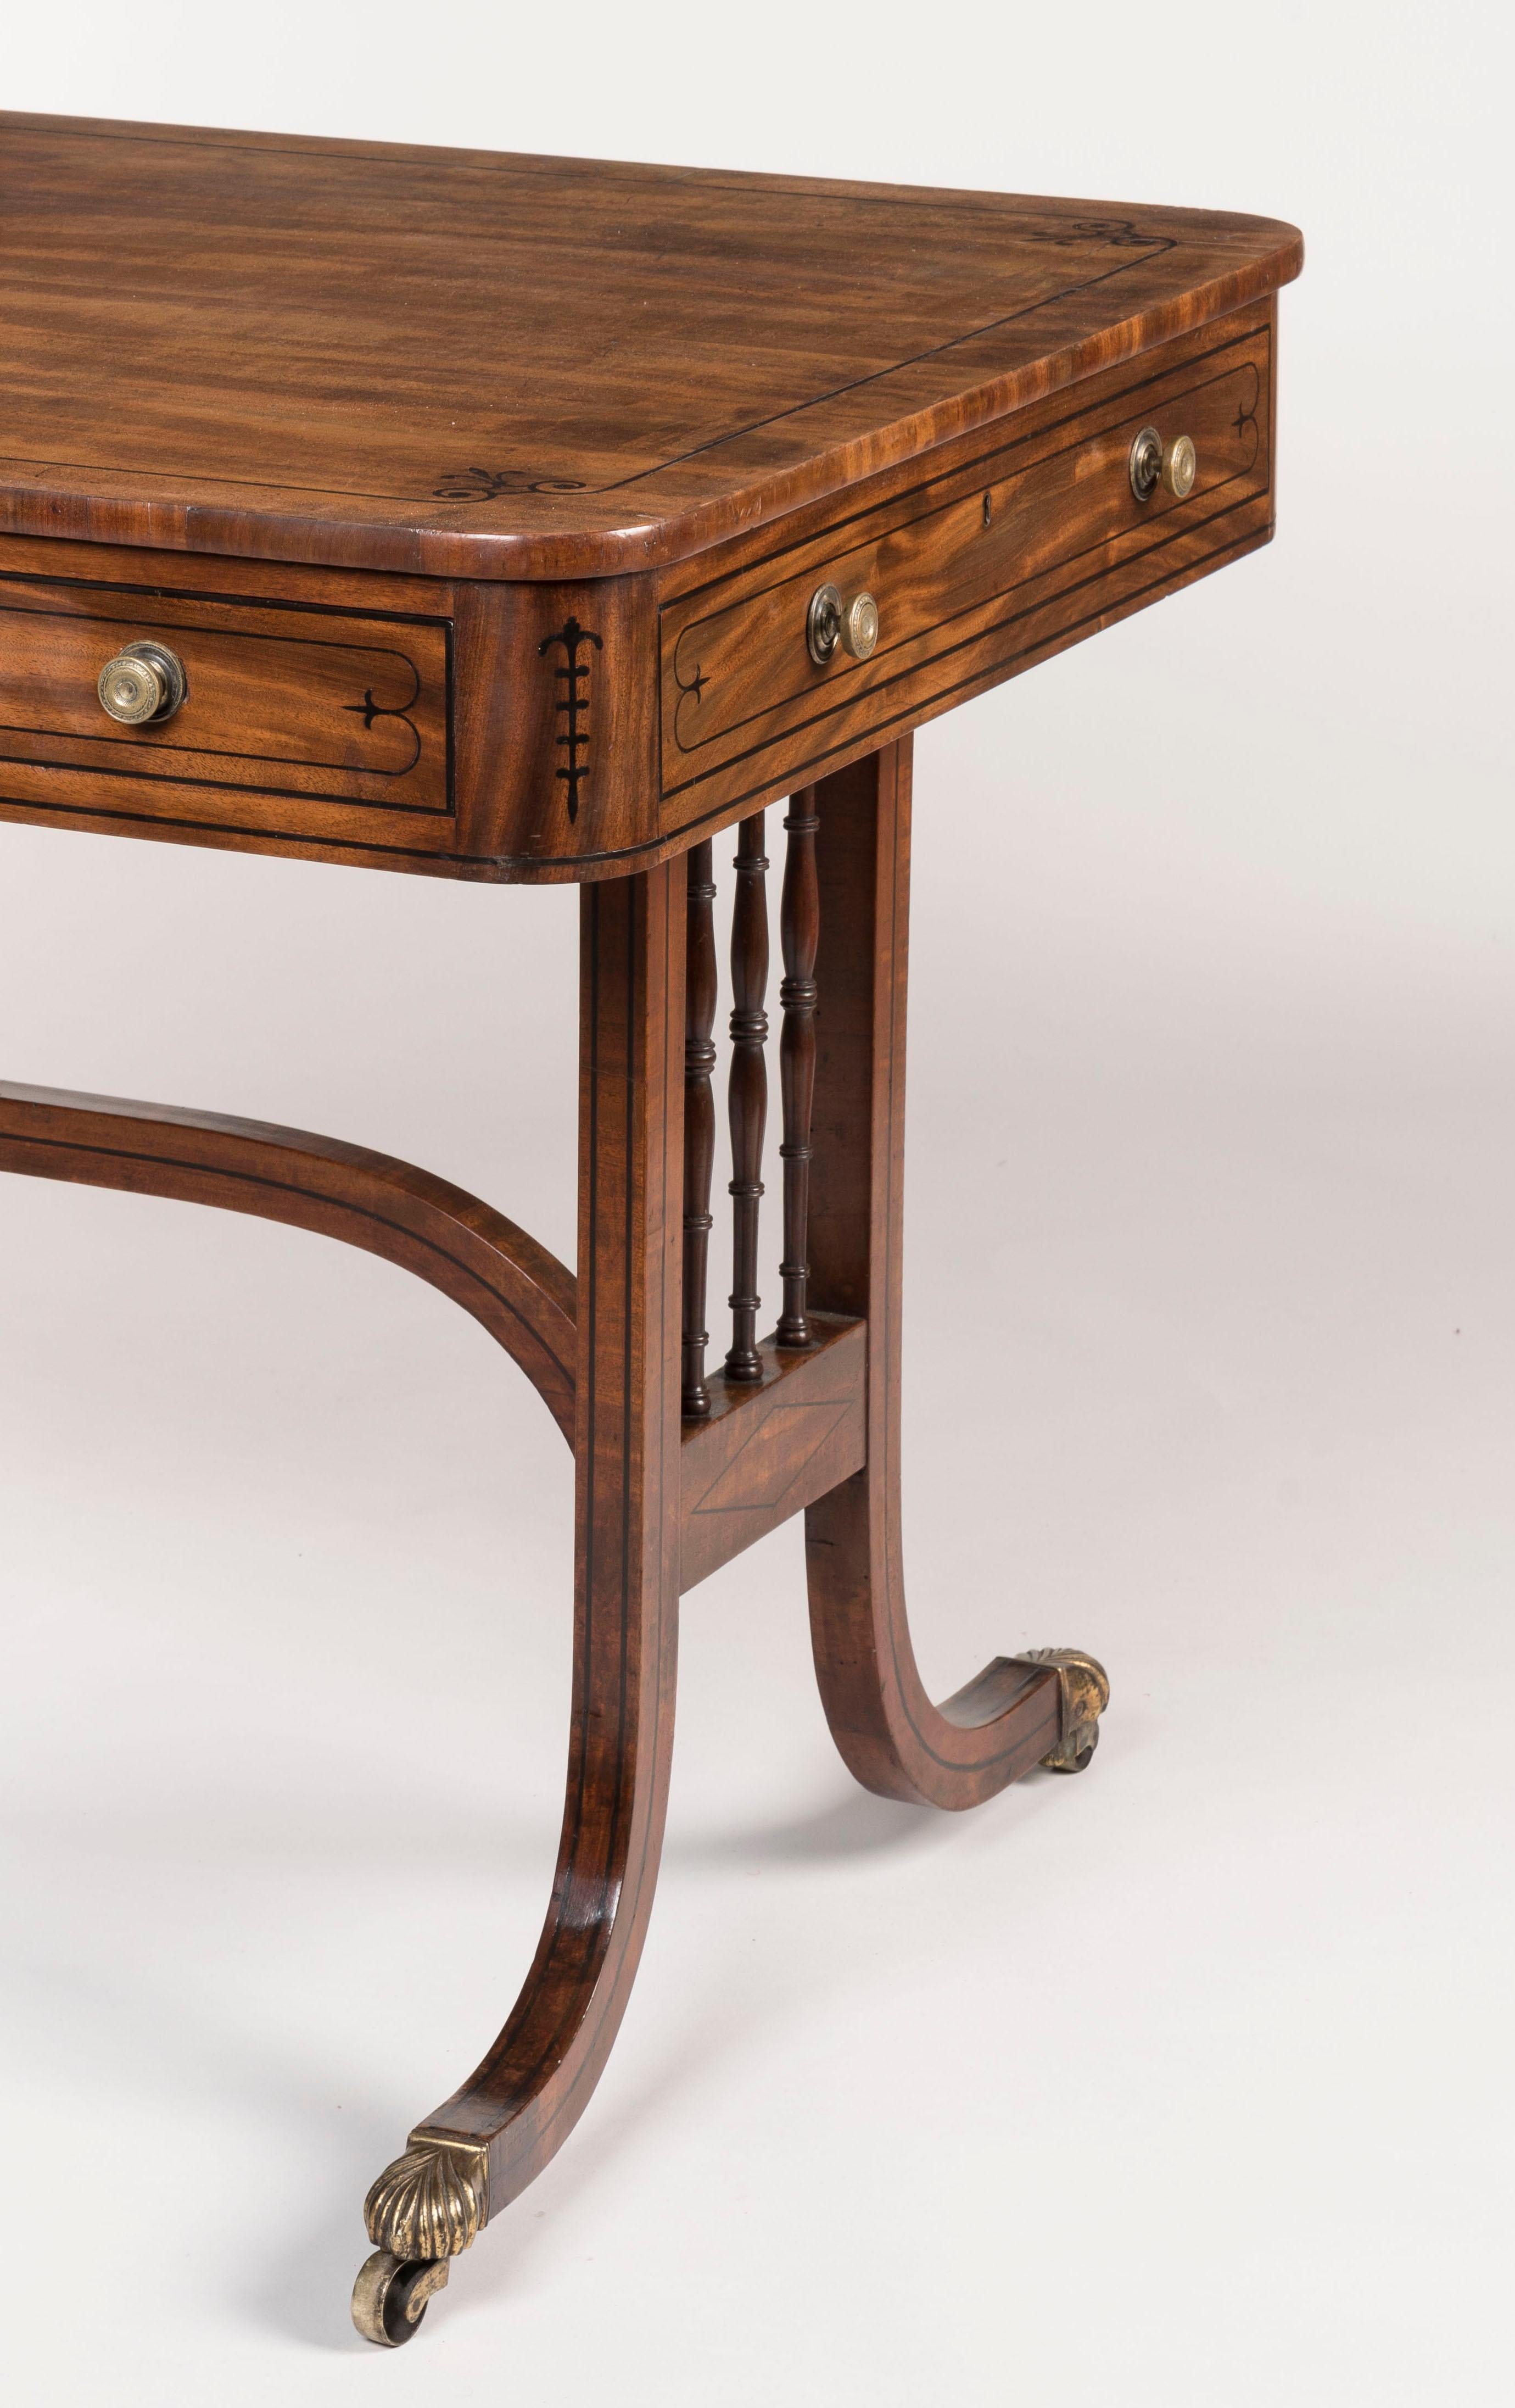 Elegant English Regency Period Mahogany Table with Inlaid Details For Sale 2